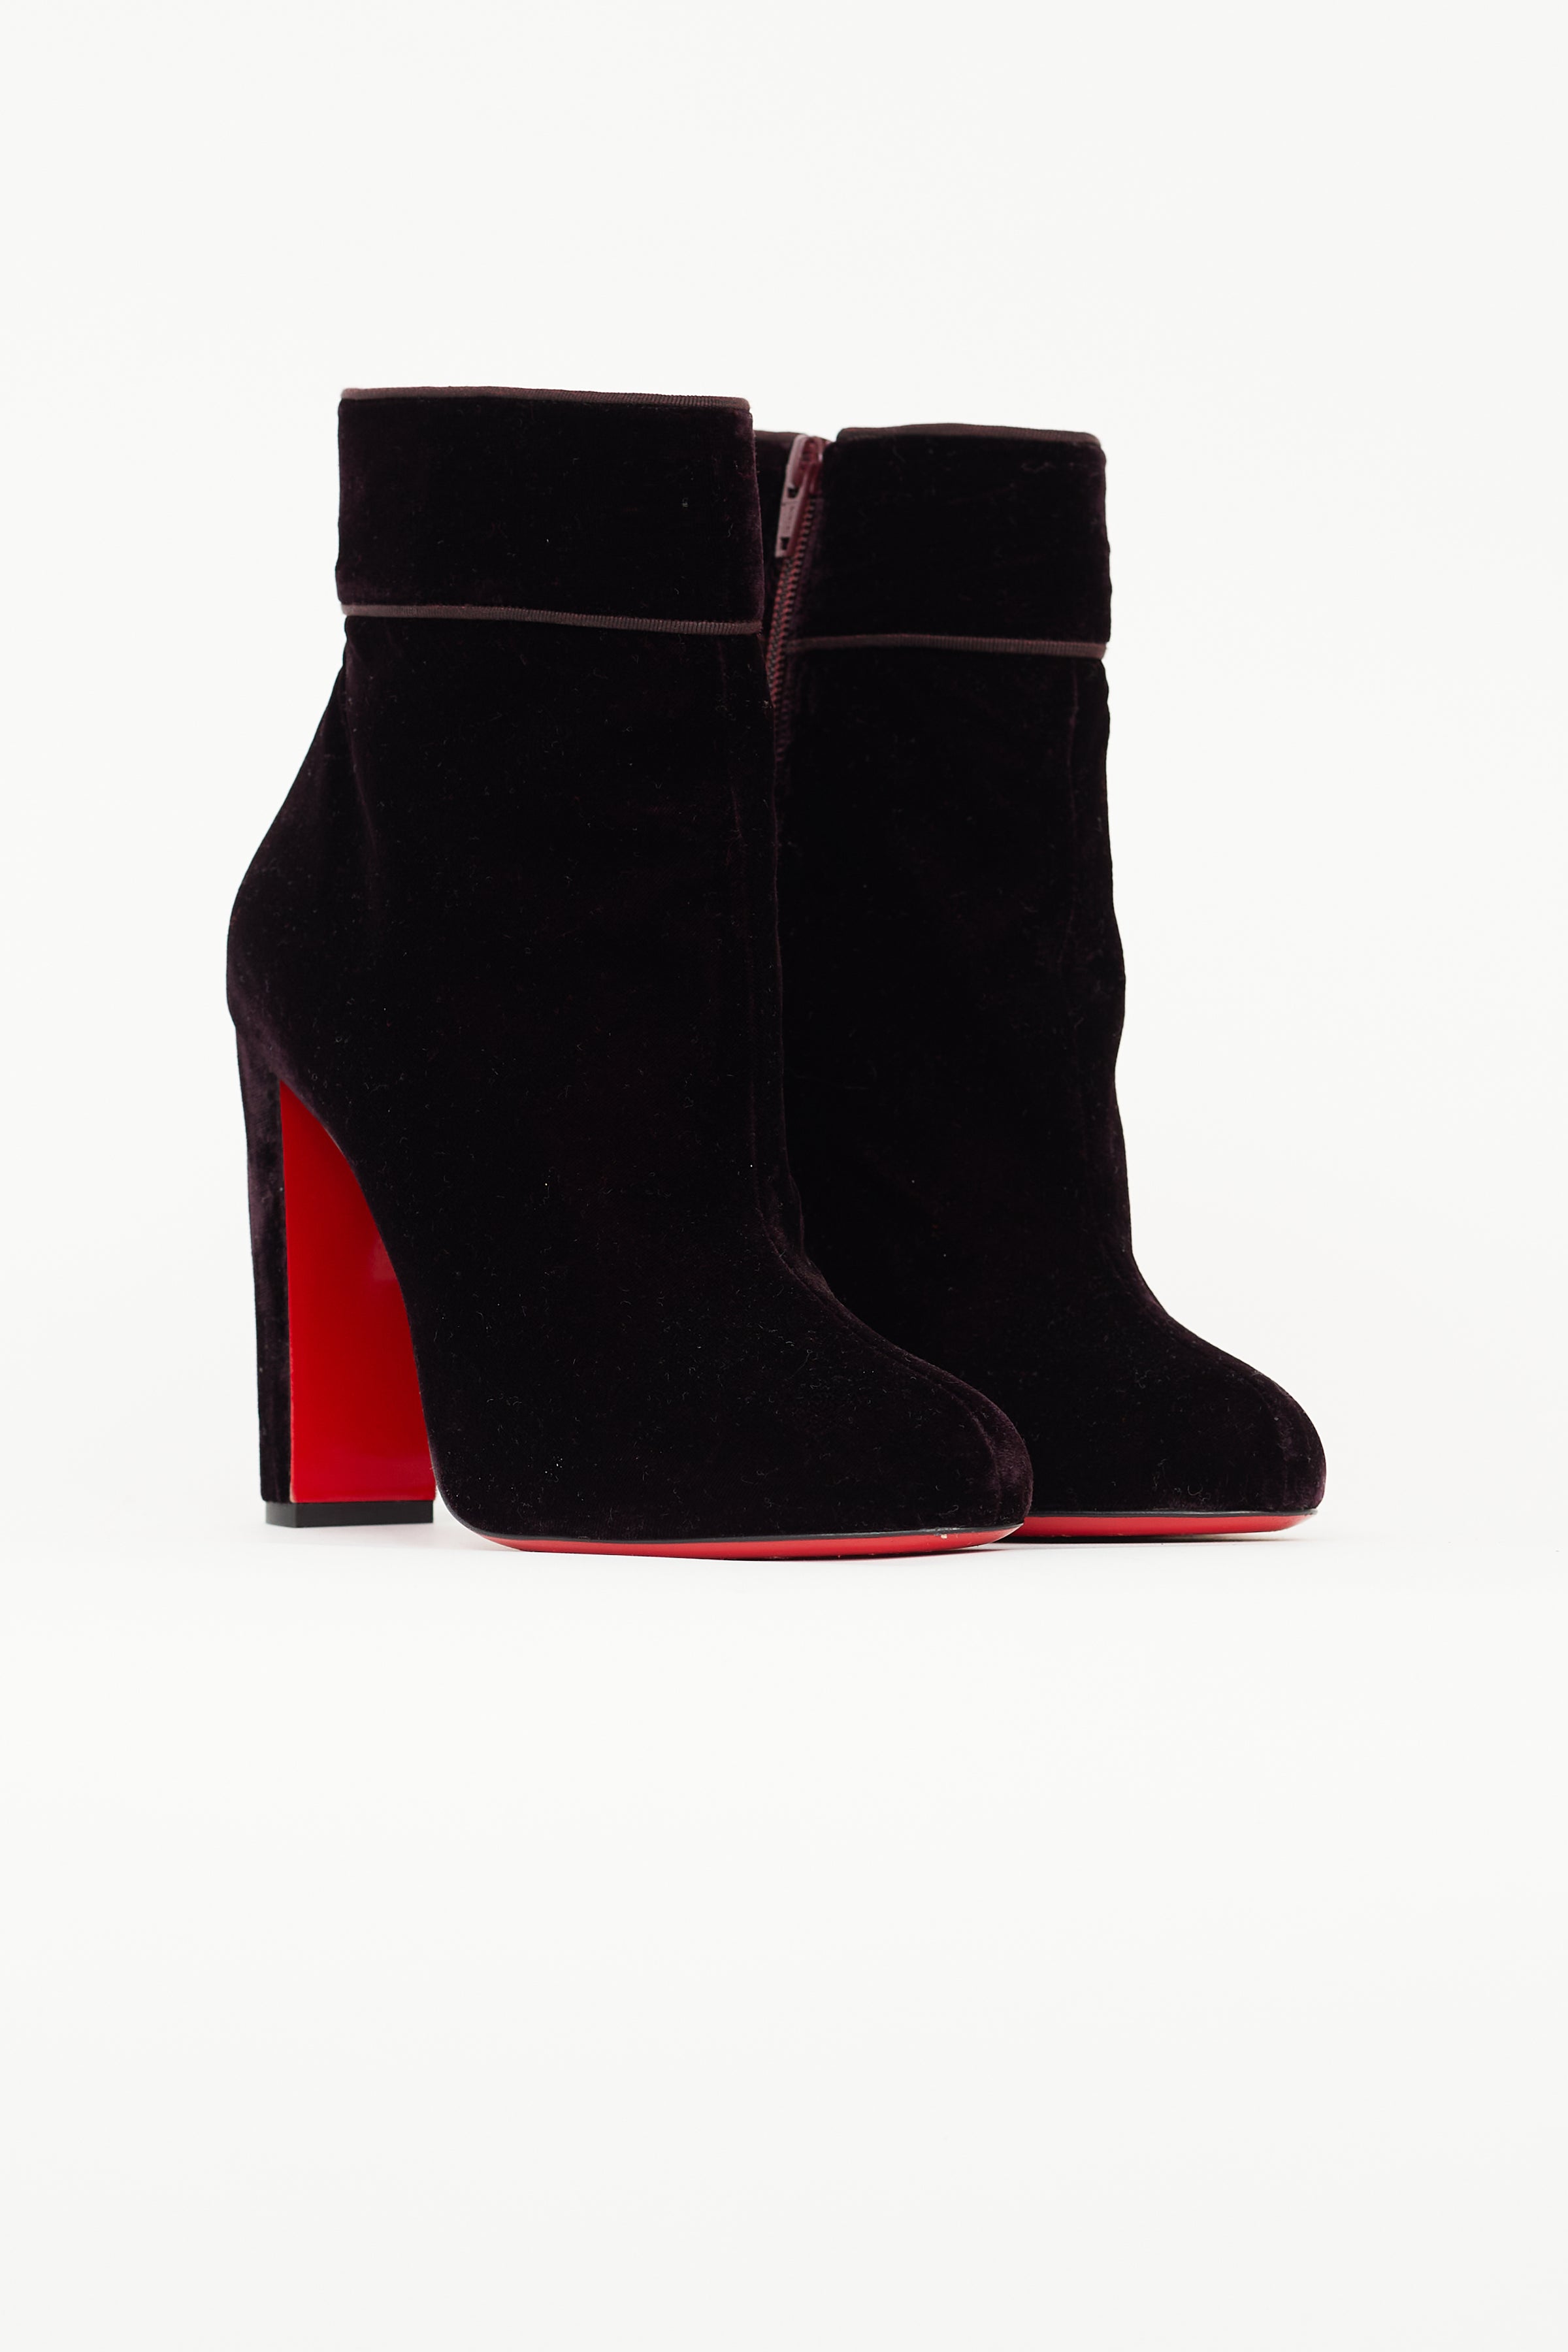 Christian Louboutin - Authenticated Ankle Boots - Velvet Black for Women, Never Worn